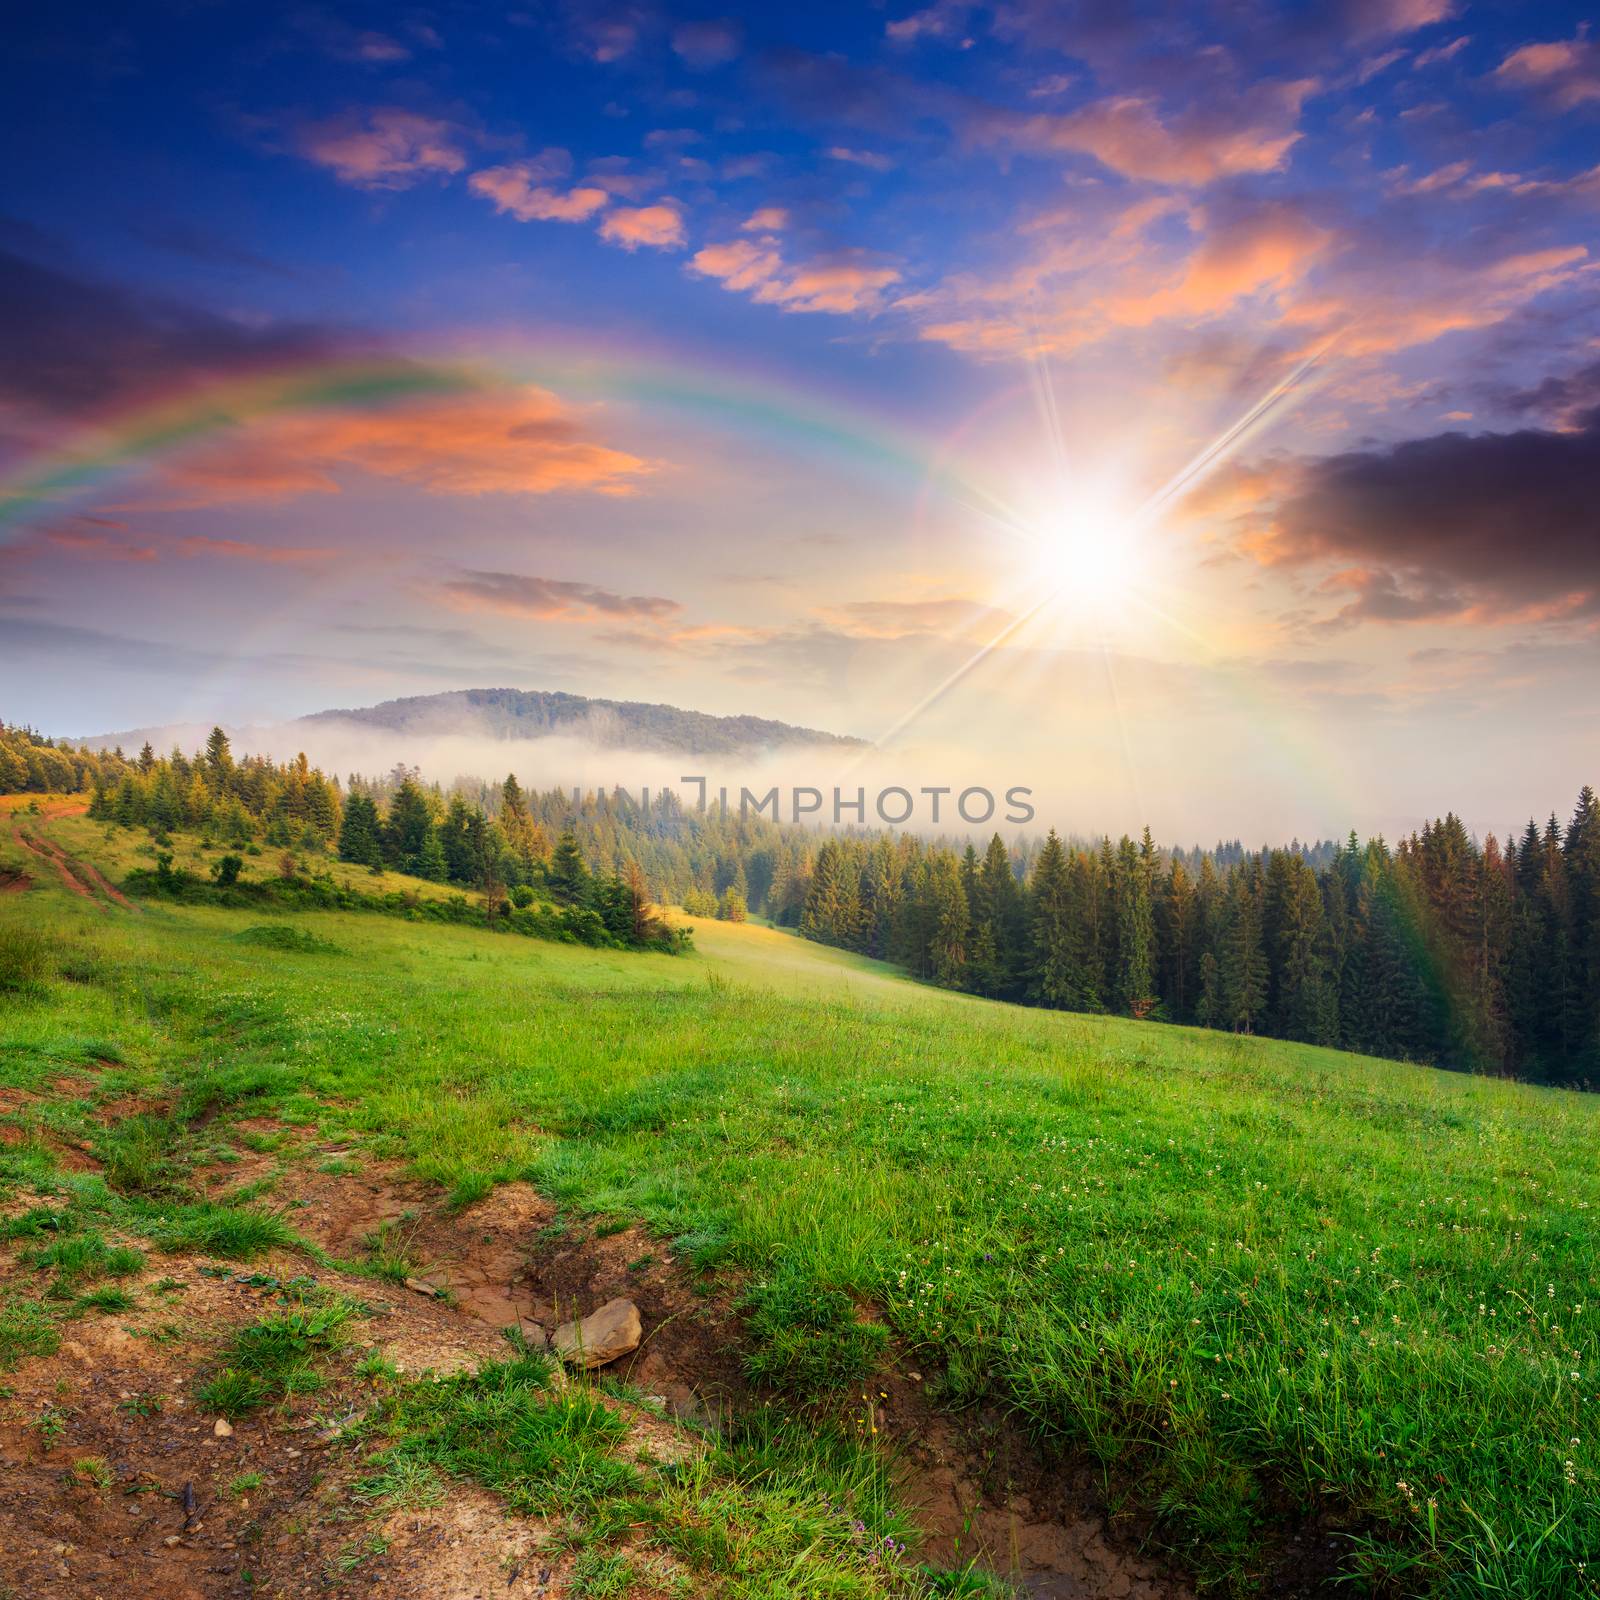 cold fog on coniferous forest near the meadow in mountains at sunset with rainbow